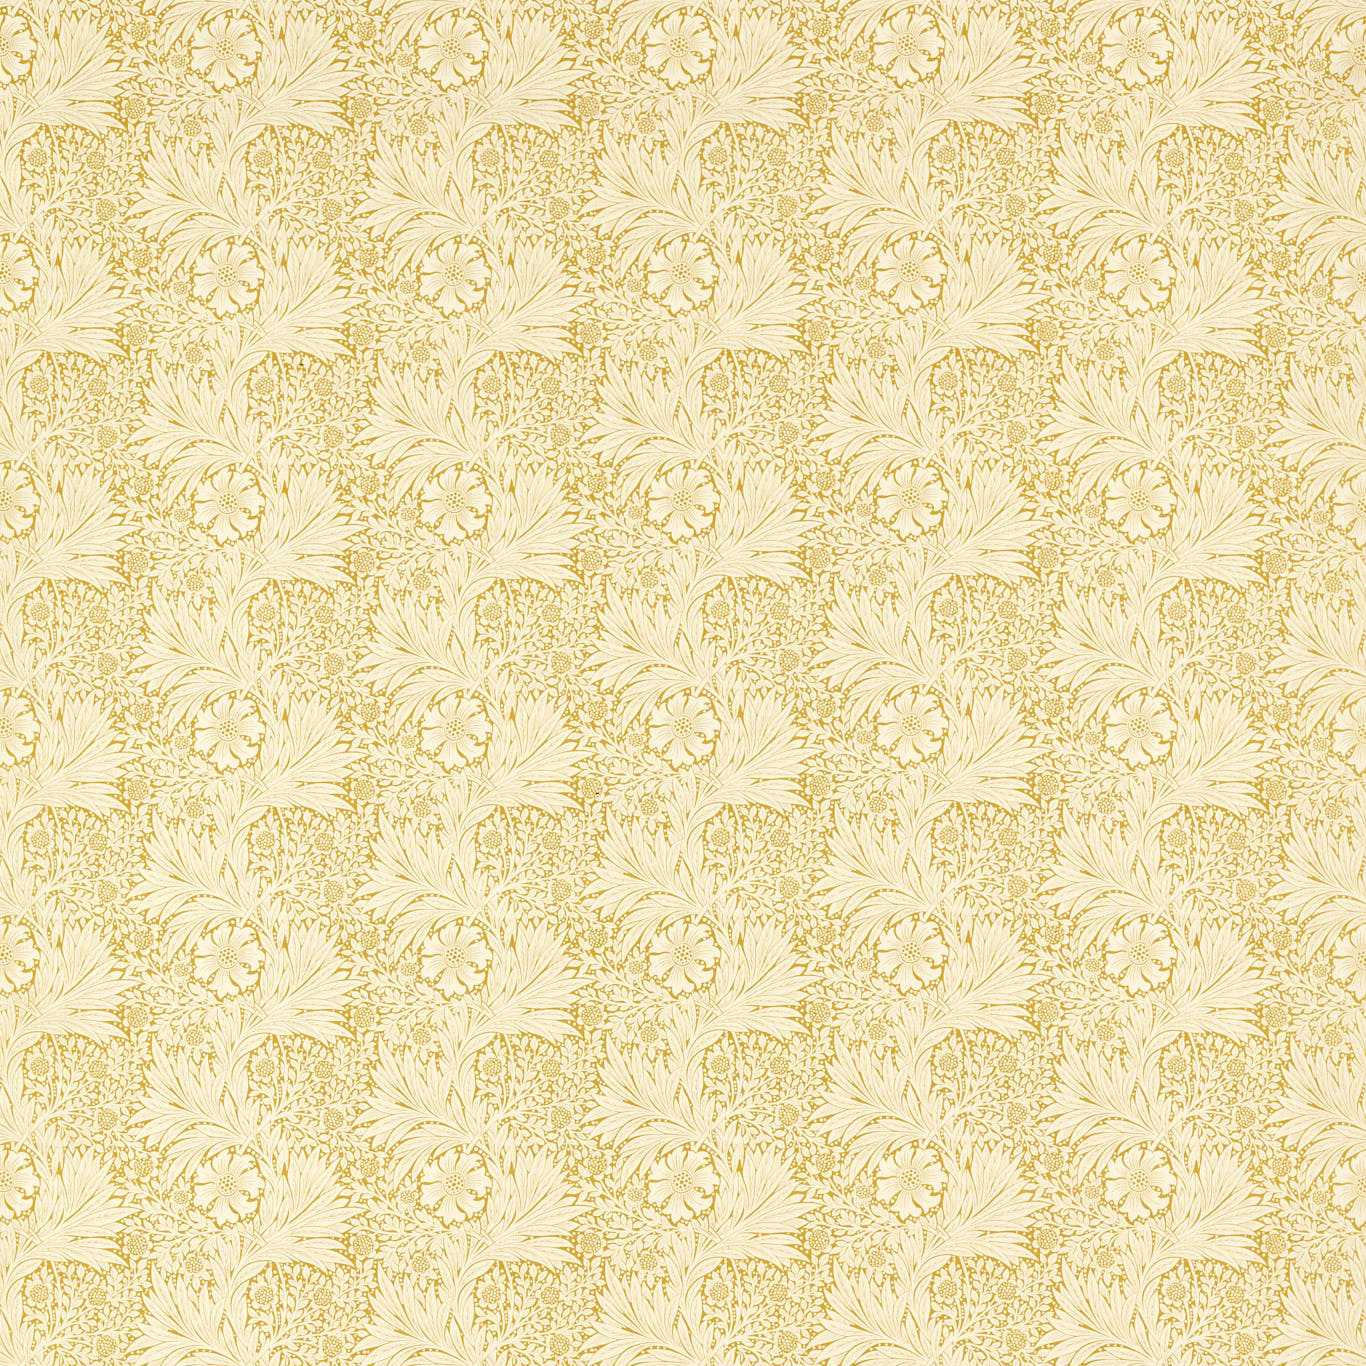 Marigold Wheat Fabric by MOR